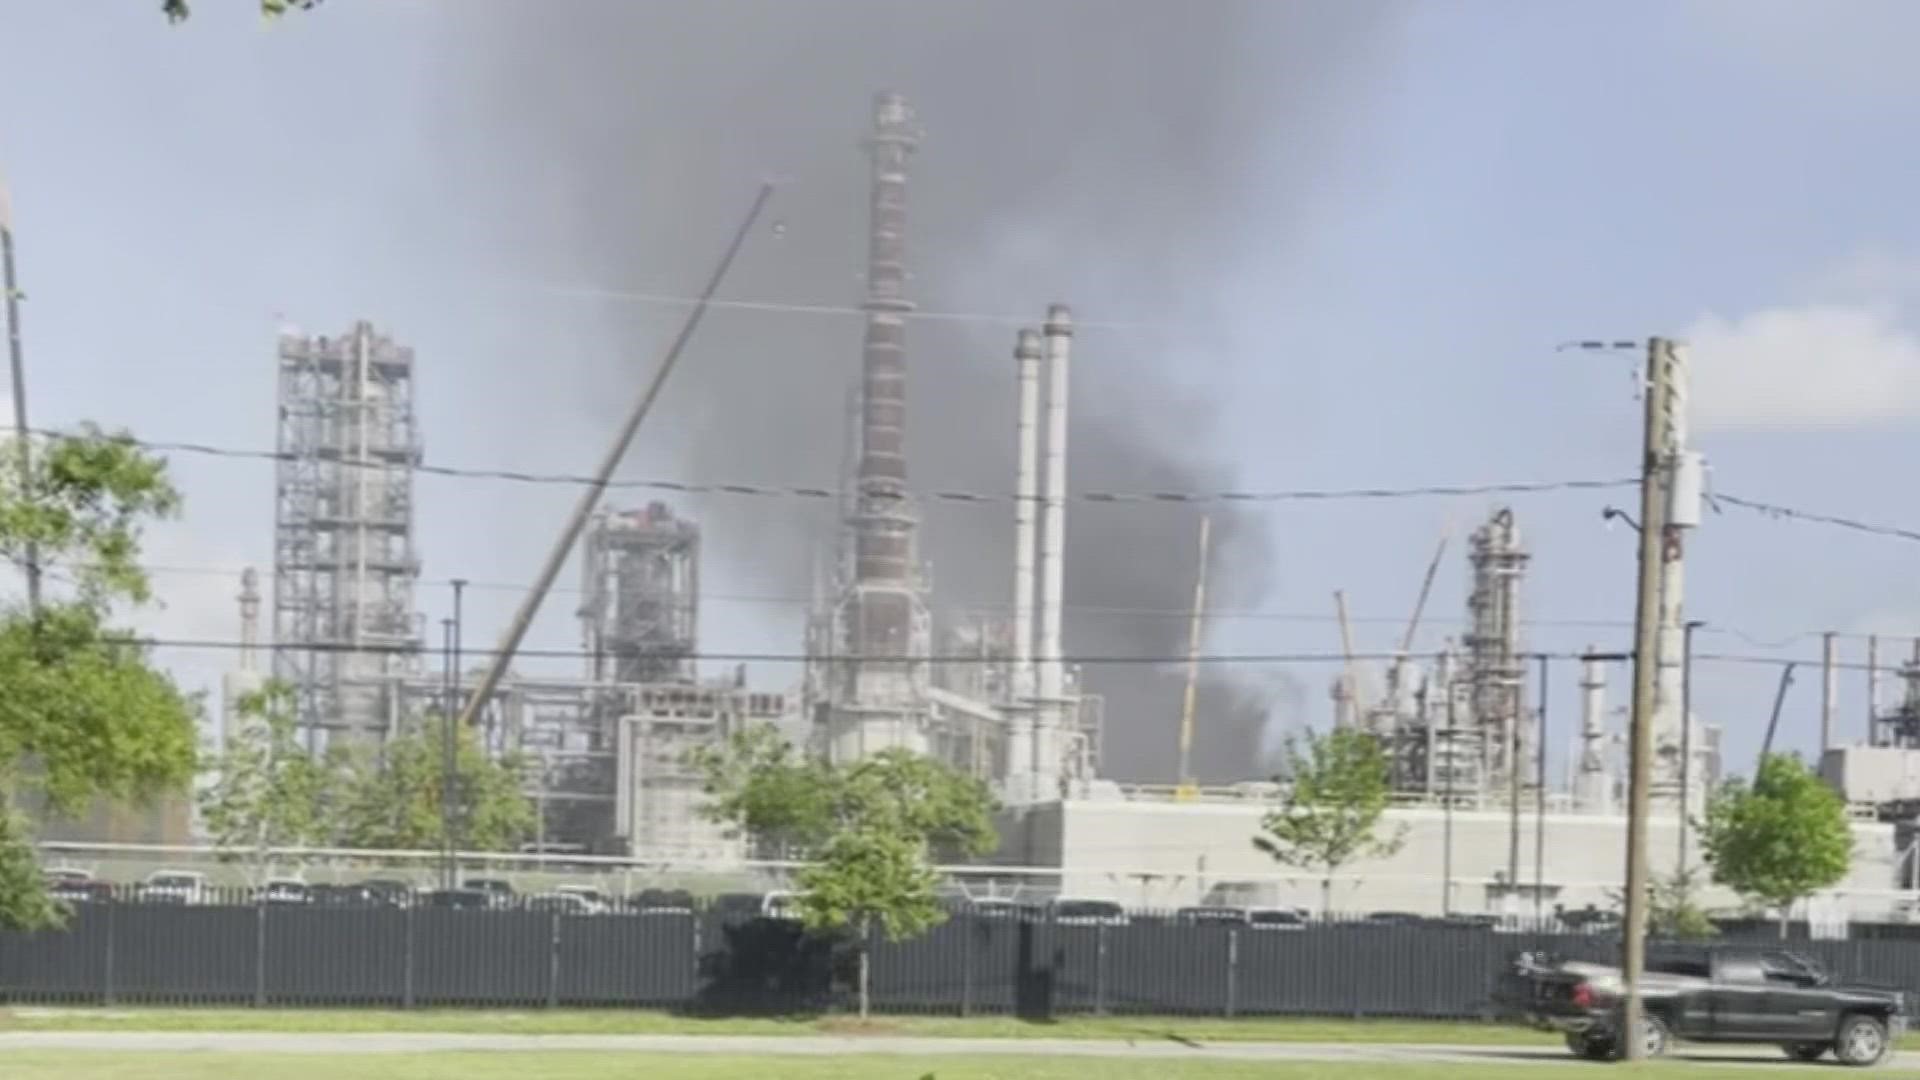 Information on a fire at a Meraux refinery that has injured 8 people.